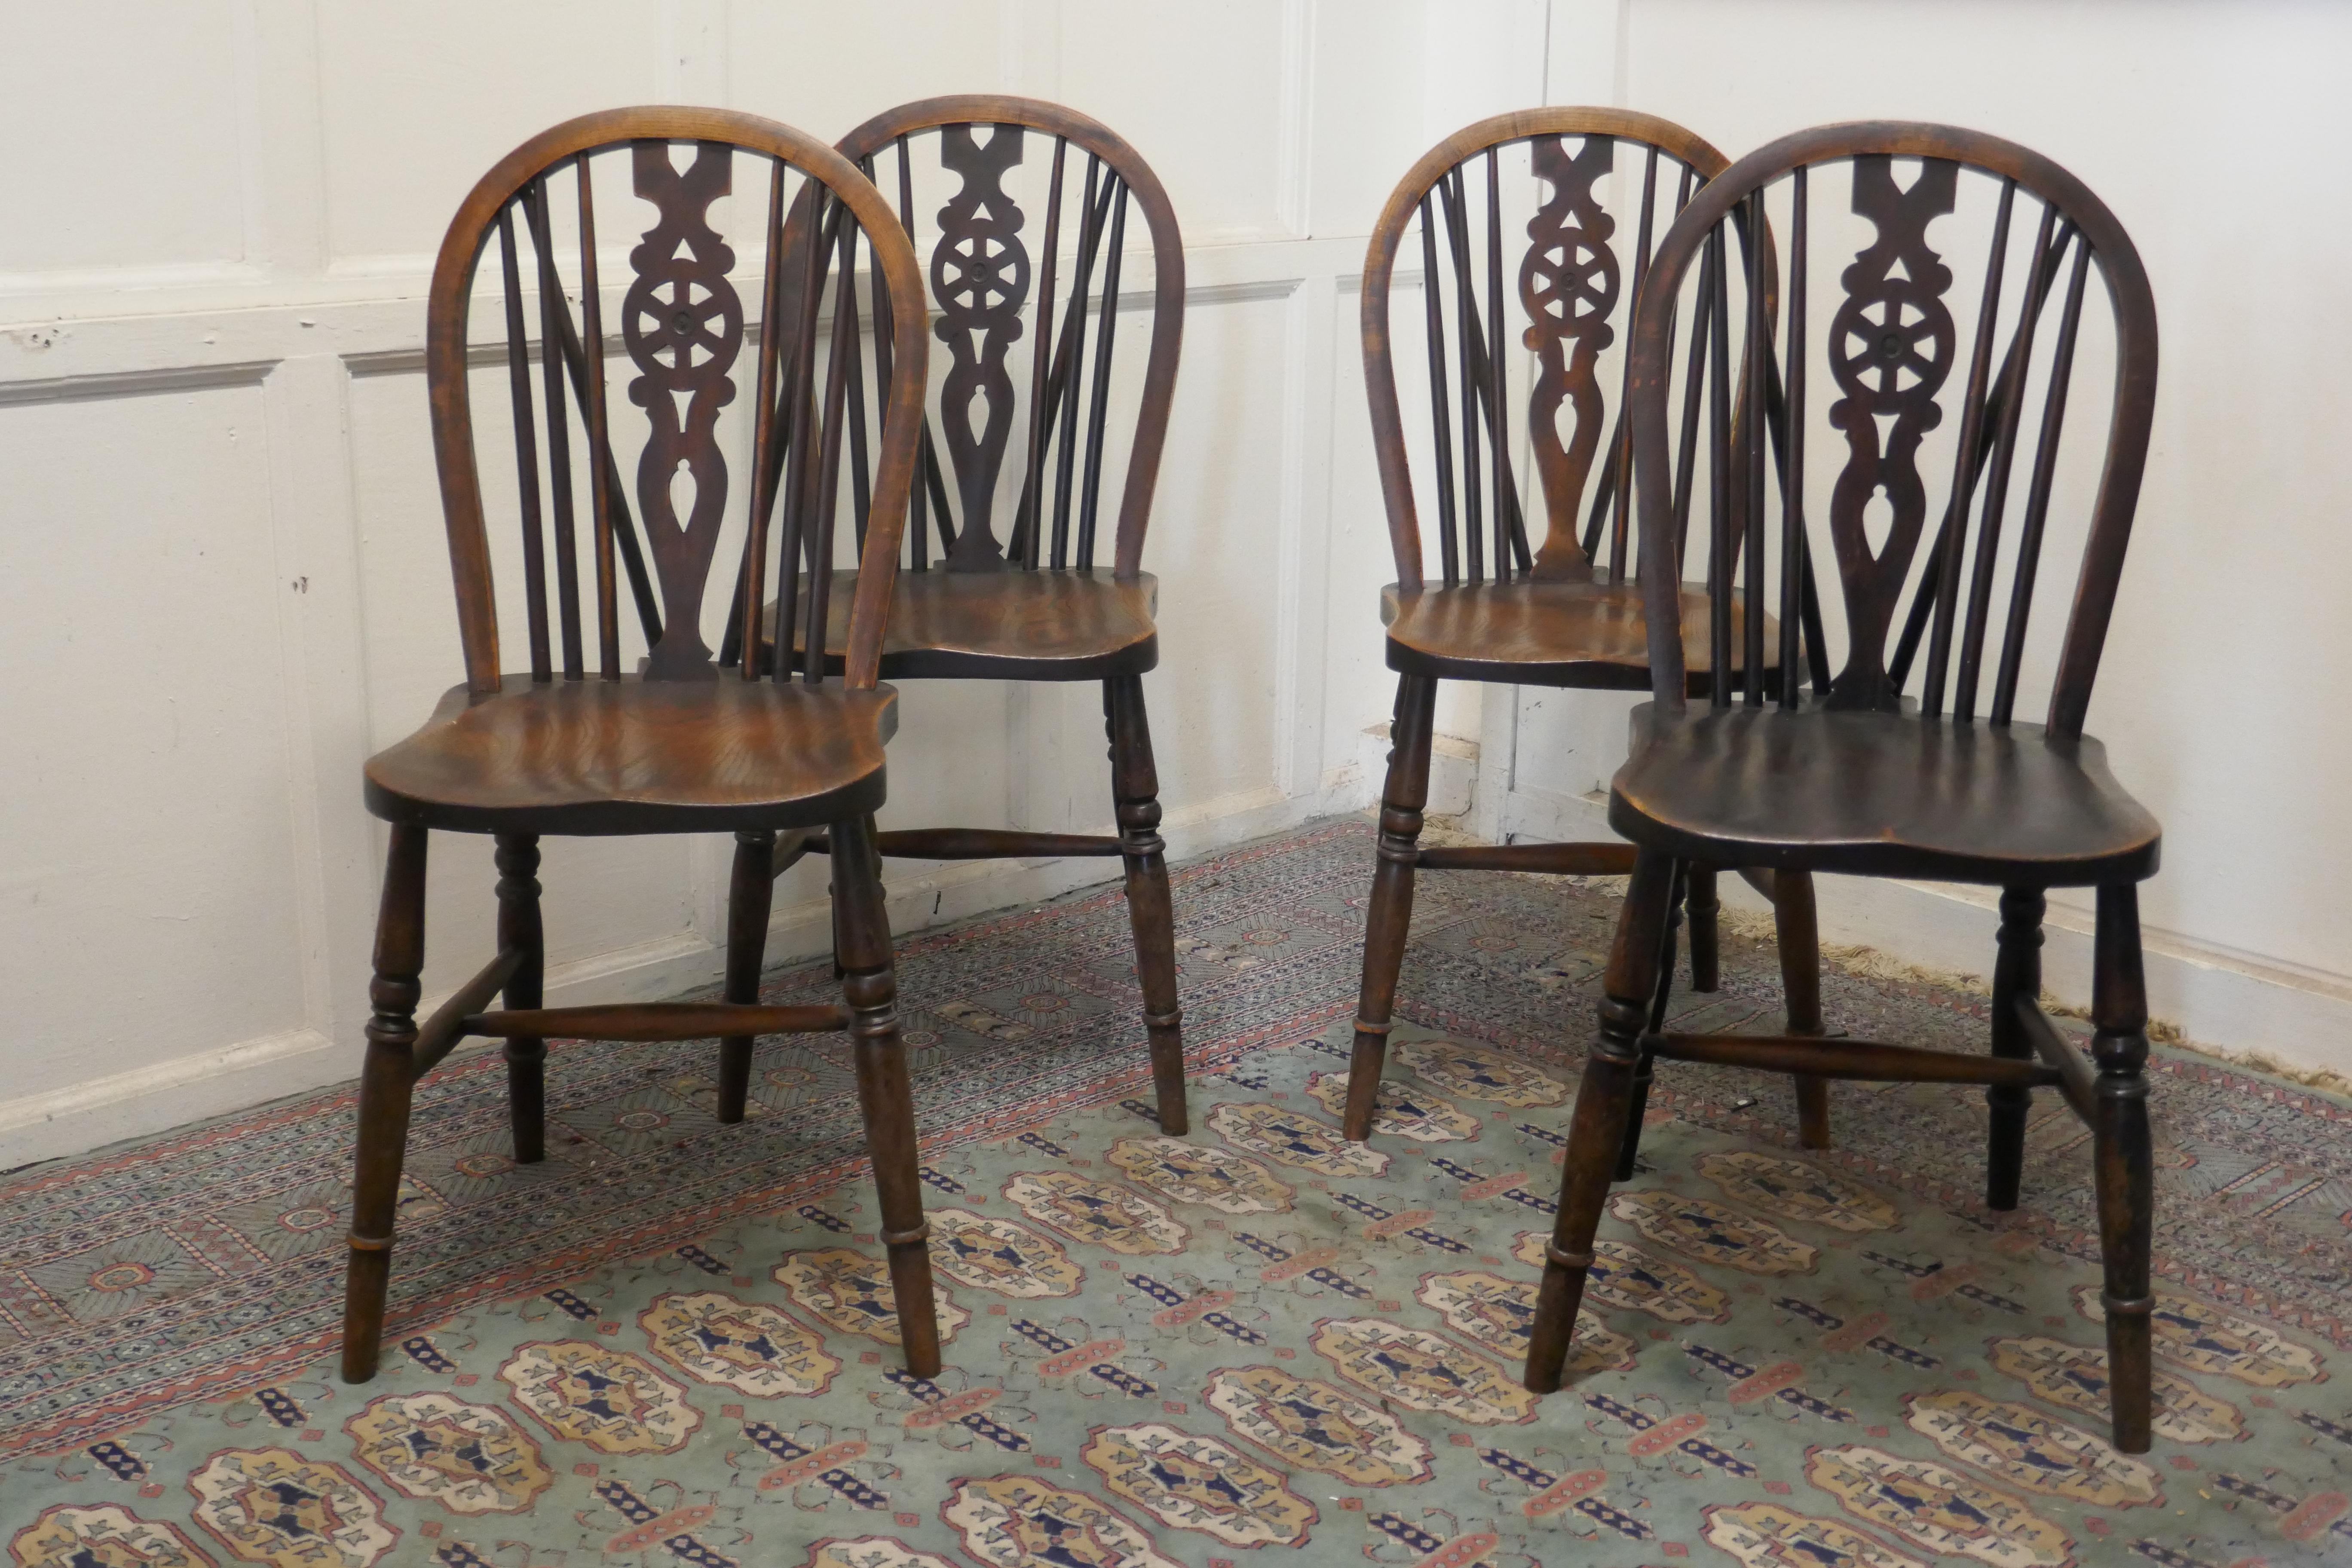 A Set of 4 beech & elm wheel back Windsor kitchen dining chairs


The chairs are a classic design and traditionally made from solid wood they have hooped wedge backs in the traditional Windsor style with spindles and a pierced centre splat in the